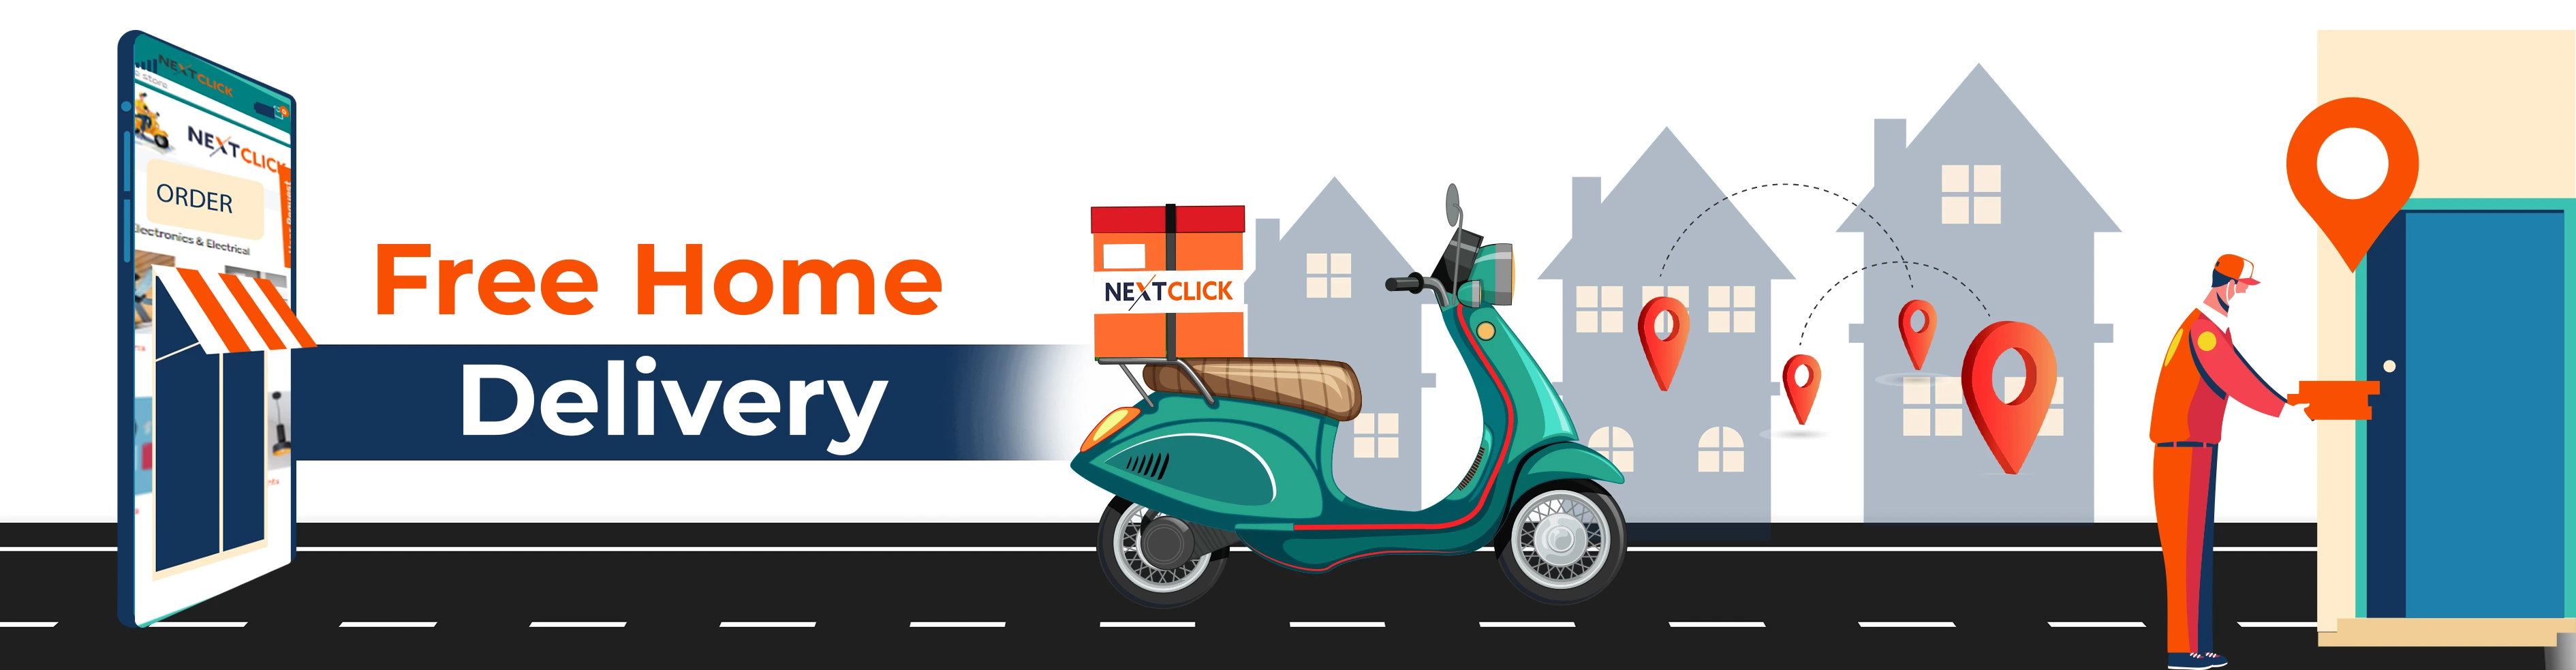 Free home delivery on online orders from the nextclick app